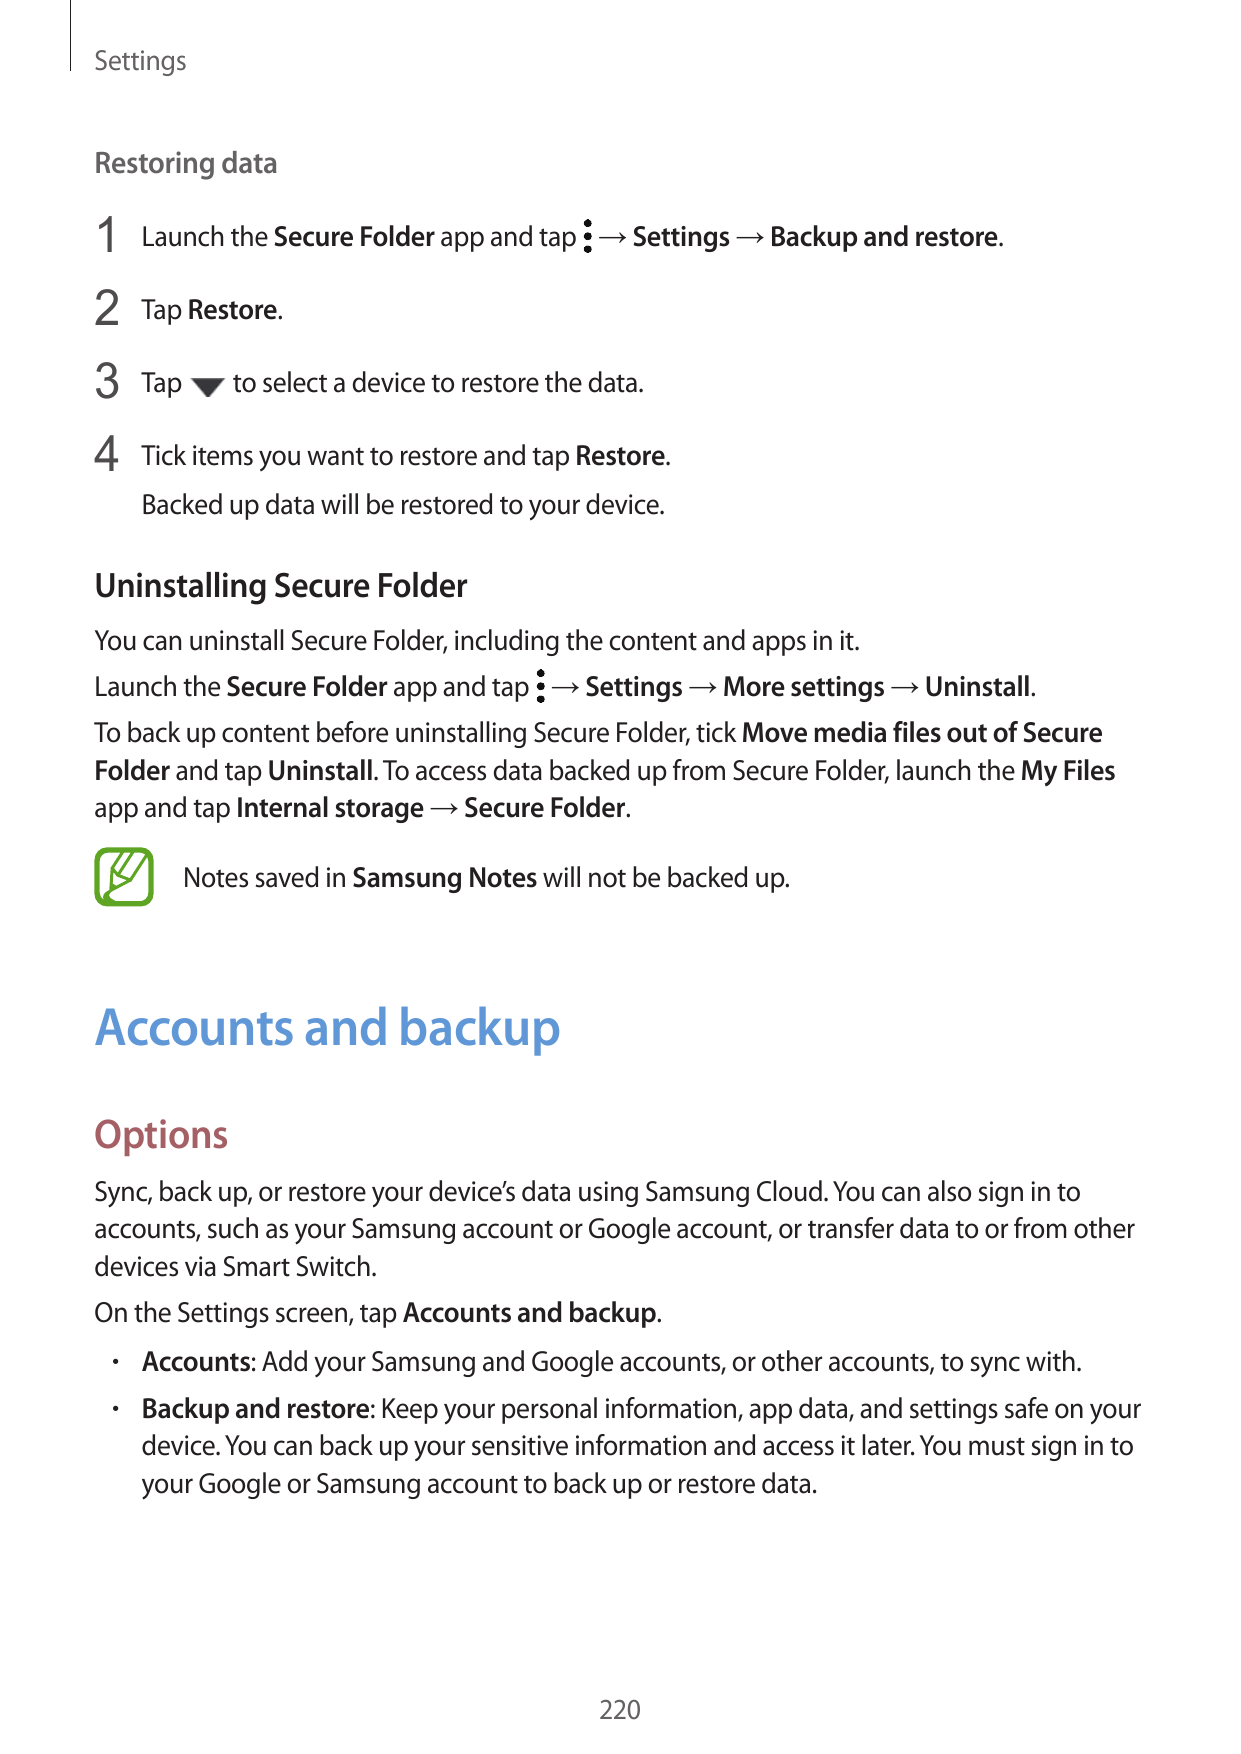 SettingsRestoring data1 Launch the Secure Folder app and tap → Settings → Backup and restore.2 Tap Restore.3 Tap to select a dev